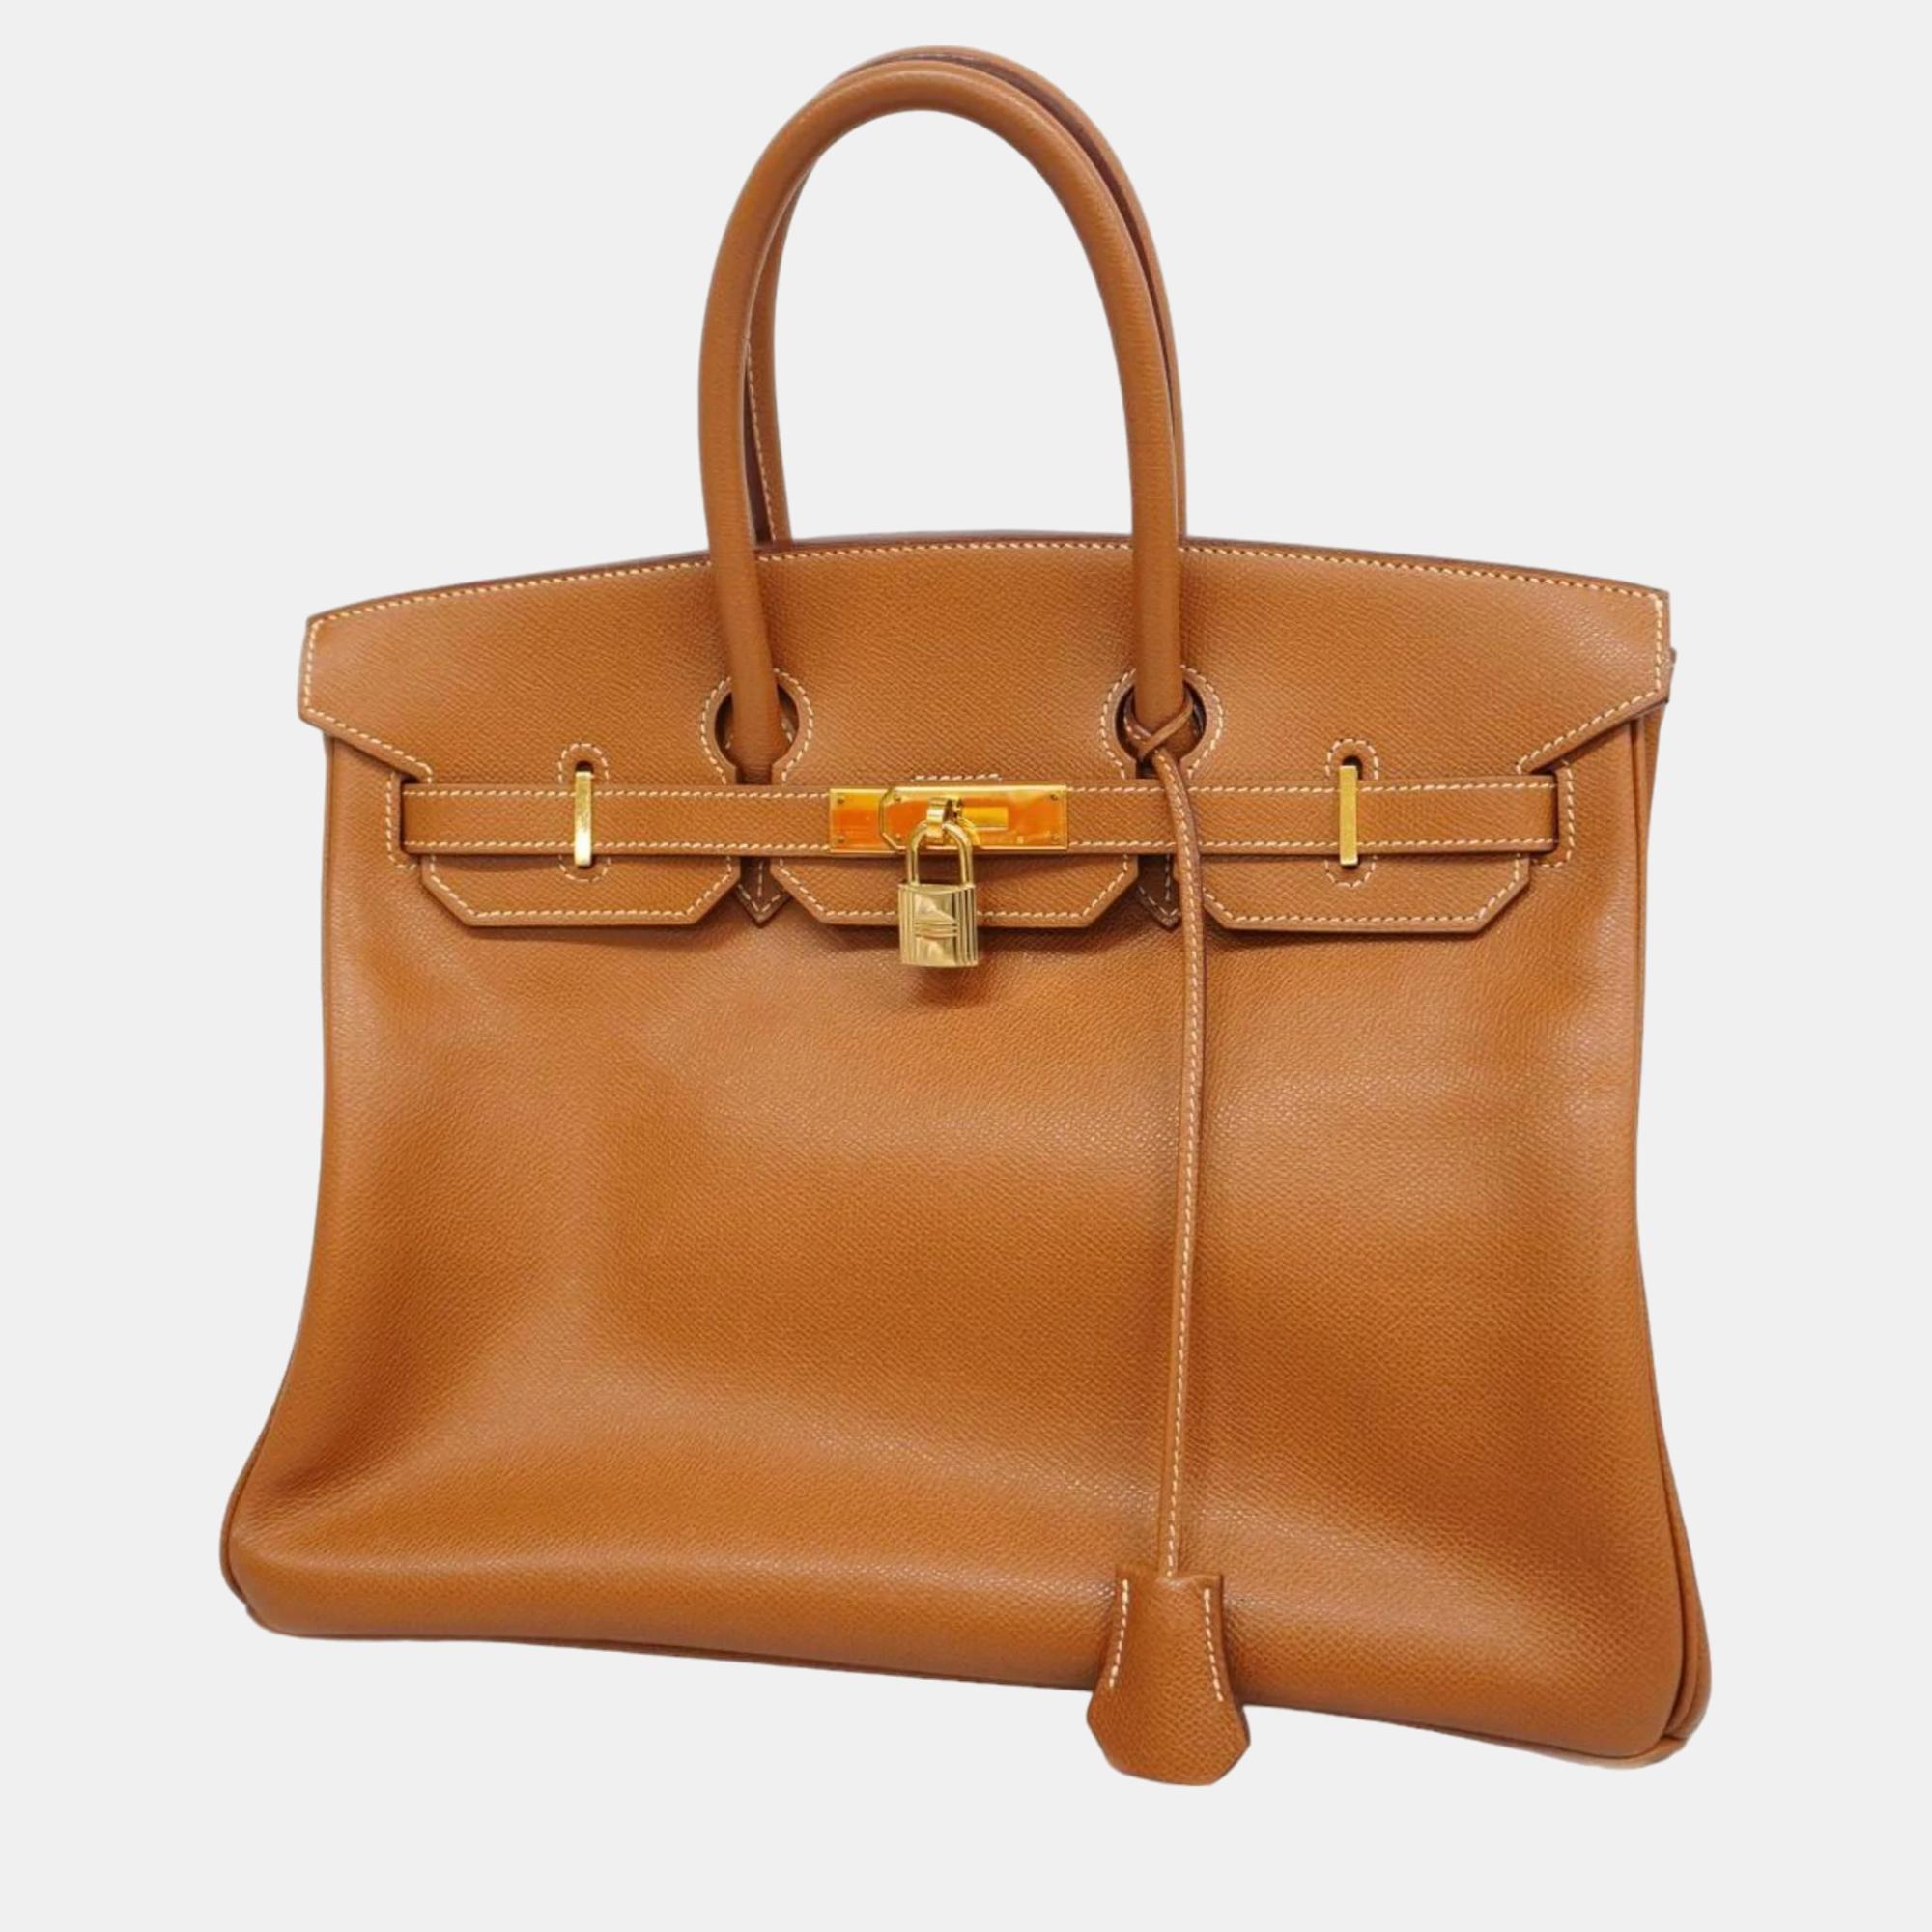 Hermes gold courchevel leather birkin 35 tote bag